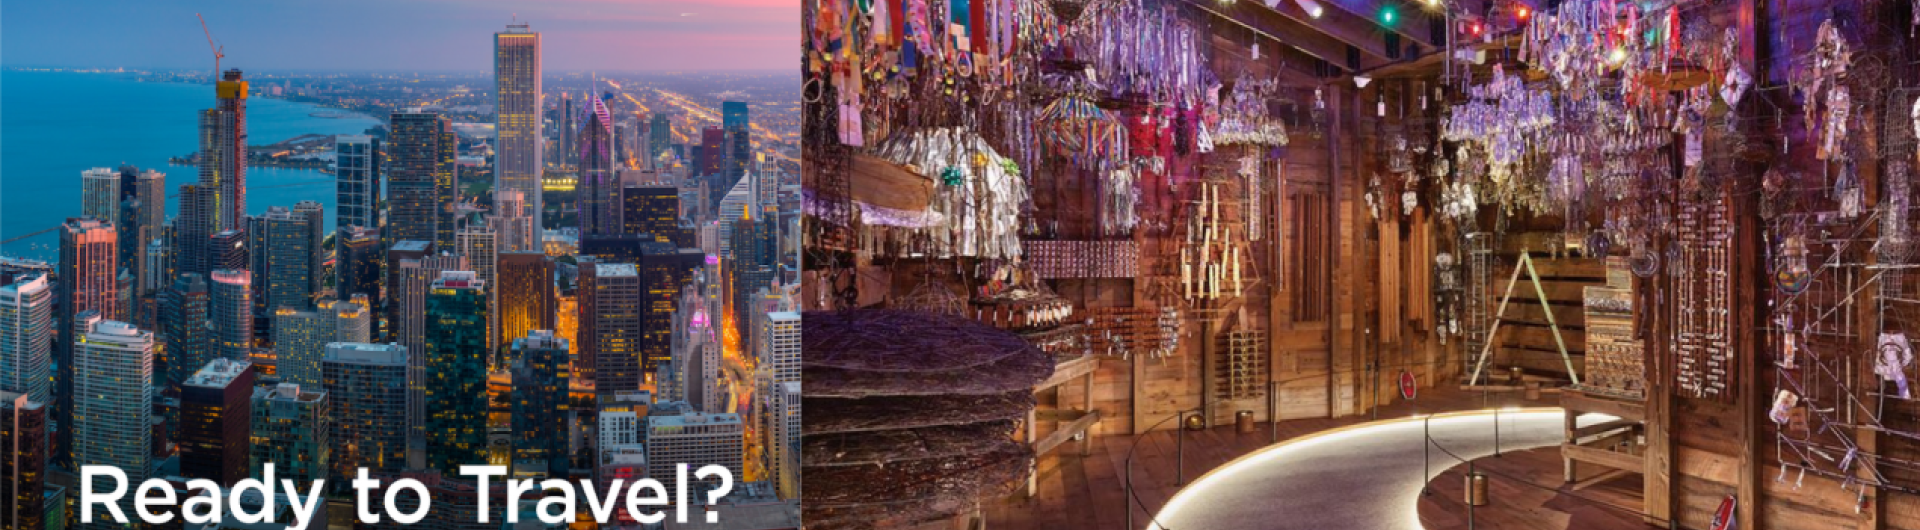 Text overlay over left image reads "Ready to Travel? Join us from September 30 to October 3" Left image is Chicago skyling at dusk. Right image is inside John Michael Kohler Arts Center